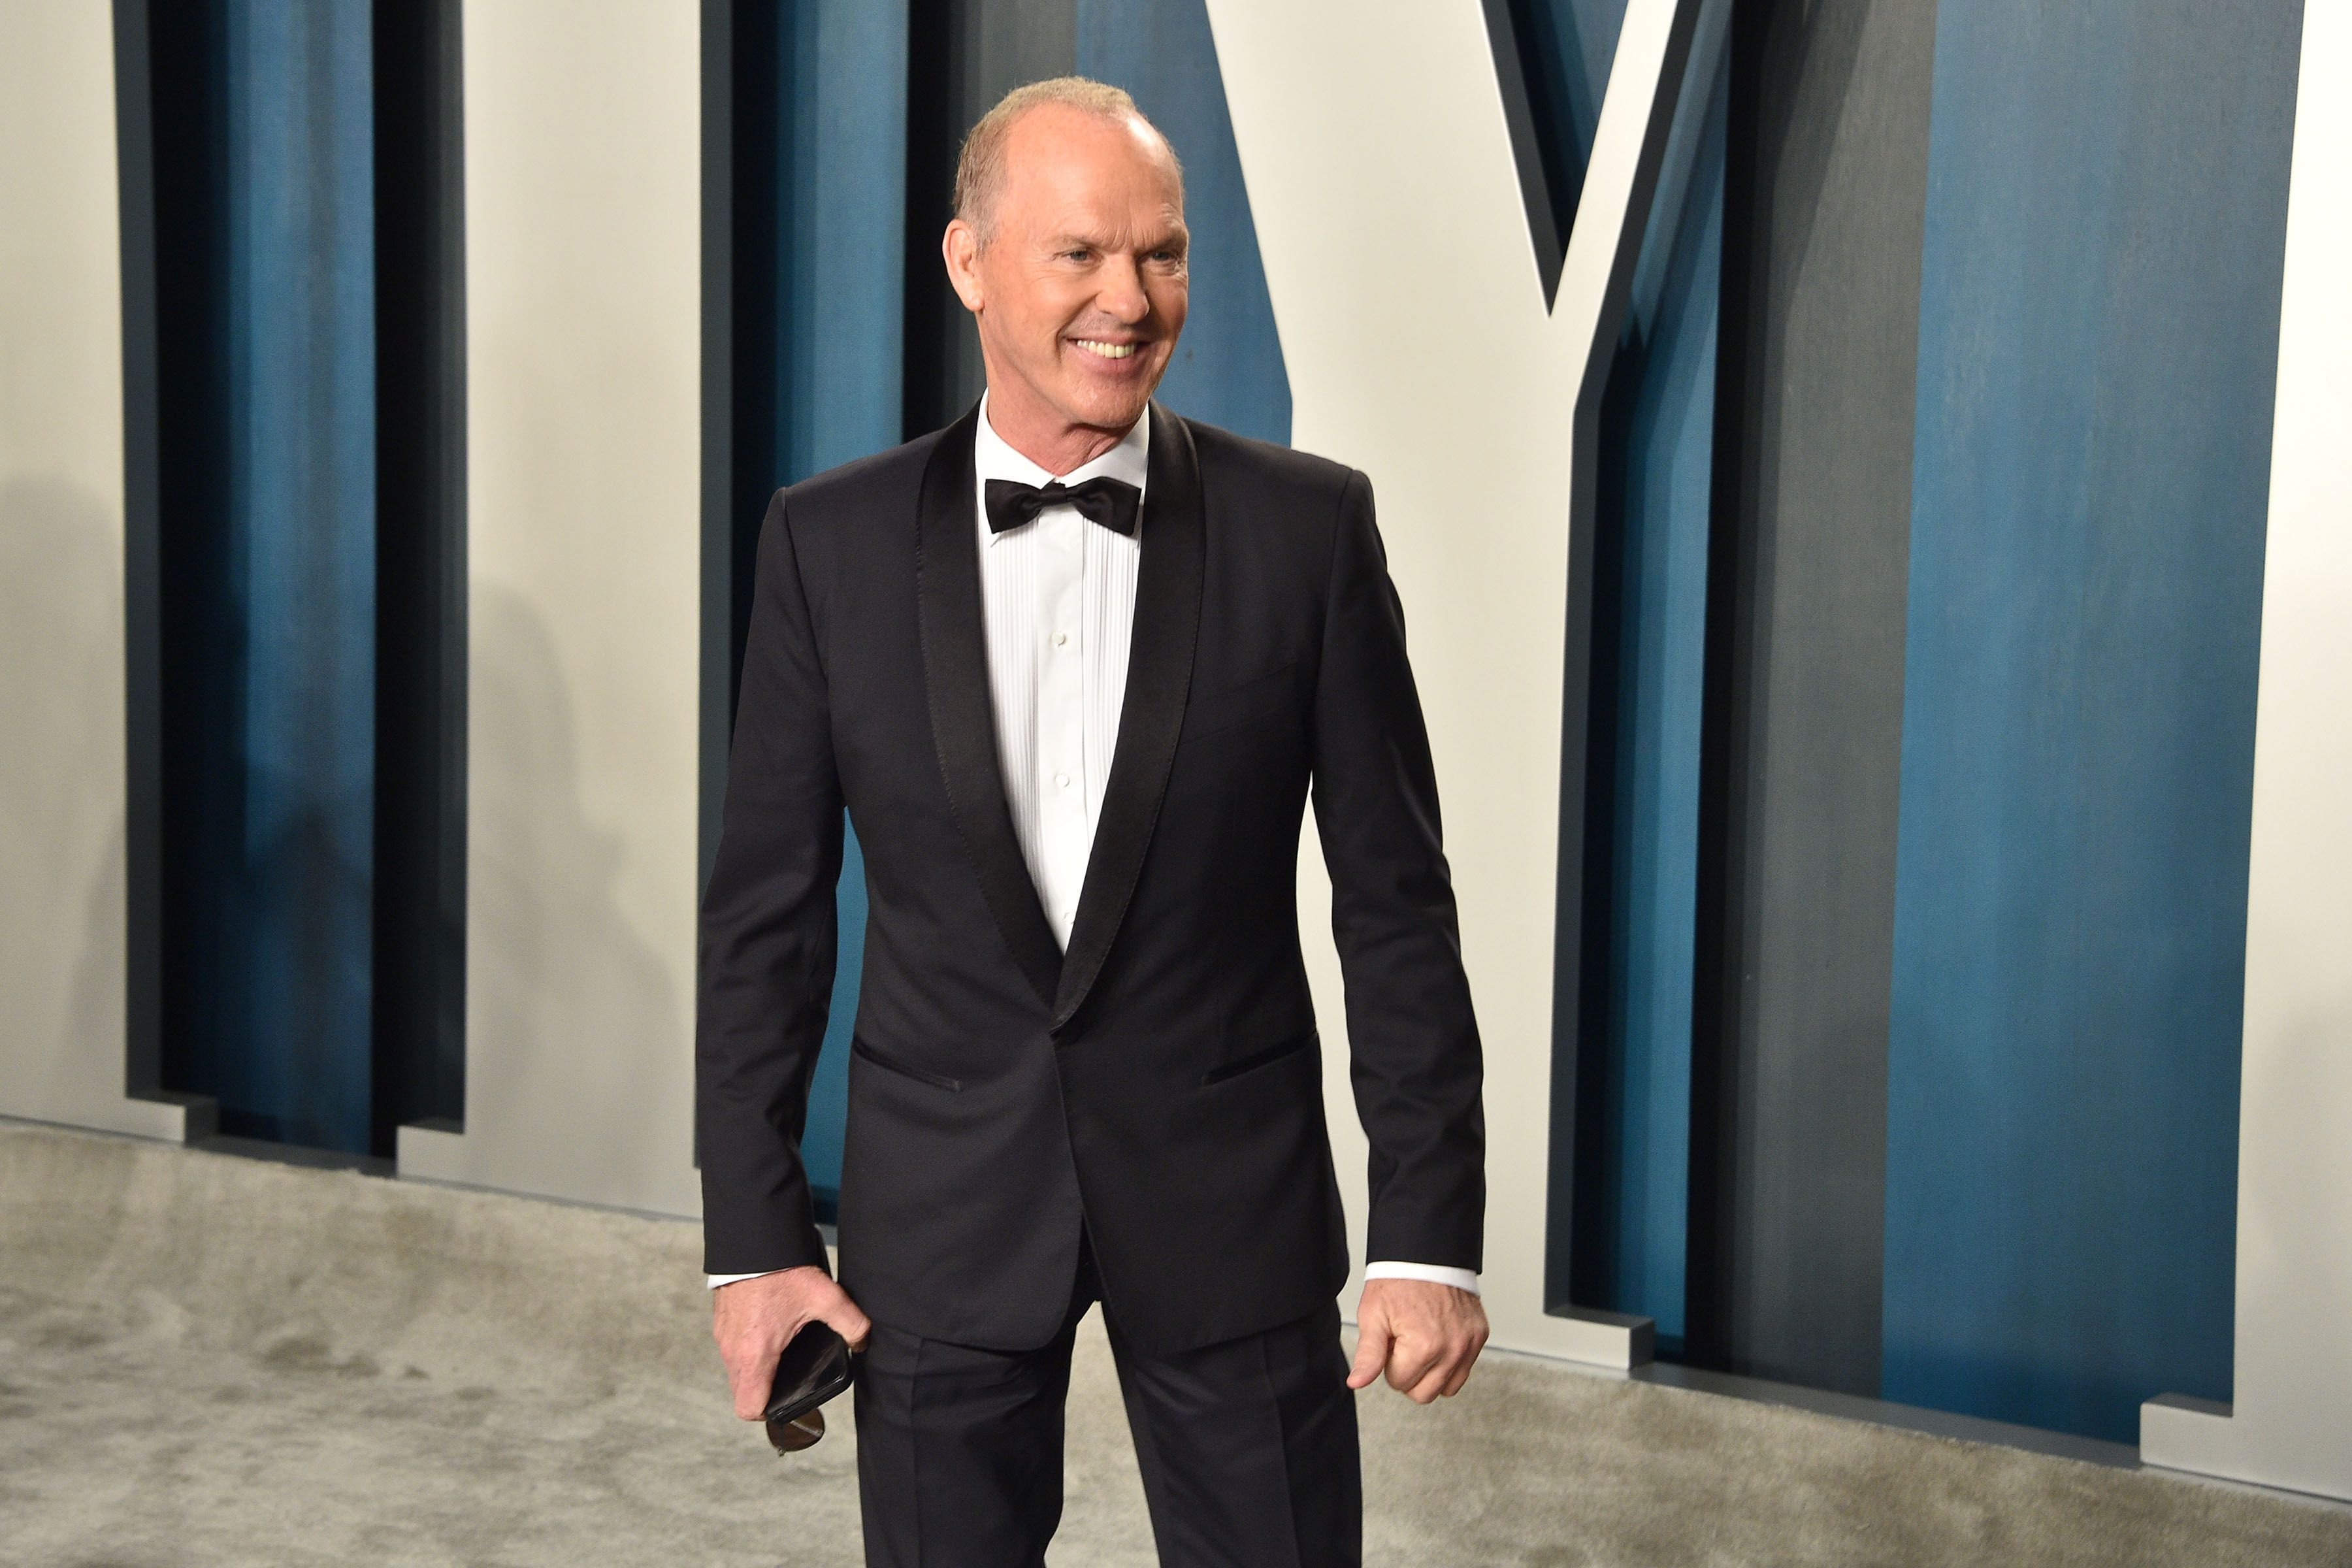 Michael Keaton at the Vanity Fair Oscar Party at Wallis Annenberg Center for the Performing Arts on February 9, 2020, in Beverly Hills, California | Photo: David Crotty/Patrick McMullan/Getty Images